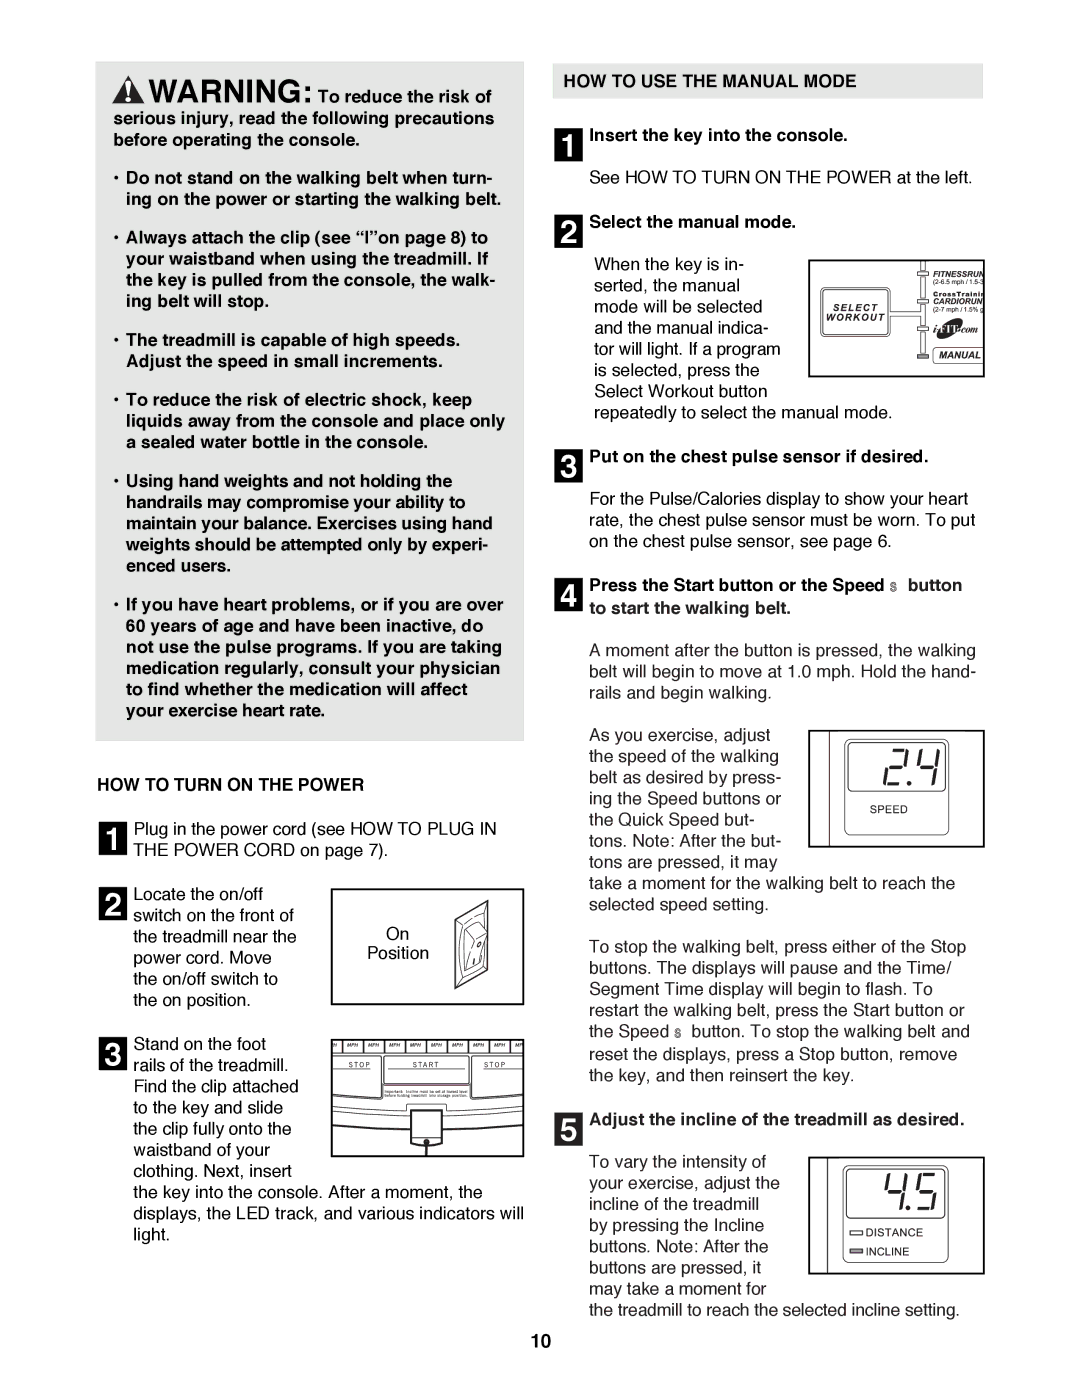 Healthrider HRTL12994 manual HOW to Turn on the Power, HOW to USE the Manual Mode 